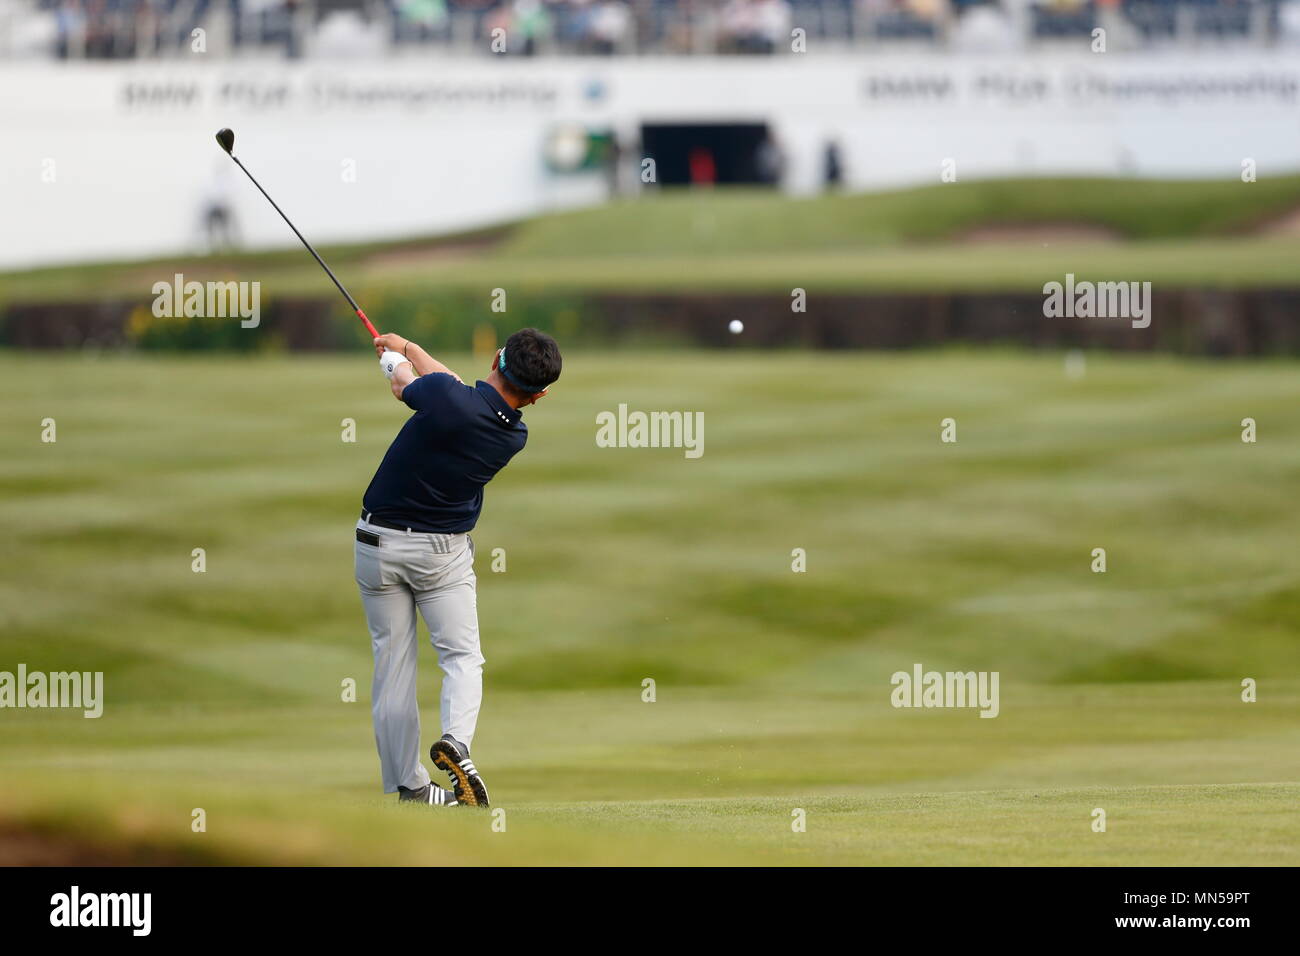 VIRGINIA WATER, ENGLAND - MAY 27: Y.E Yang approach shot from the 18th fairway, he finishes -10 under par during day two of the BMW PGA Championship at Wentworth on May 27, 2016 in Virginia Water, England. Stock Photo